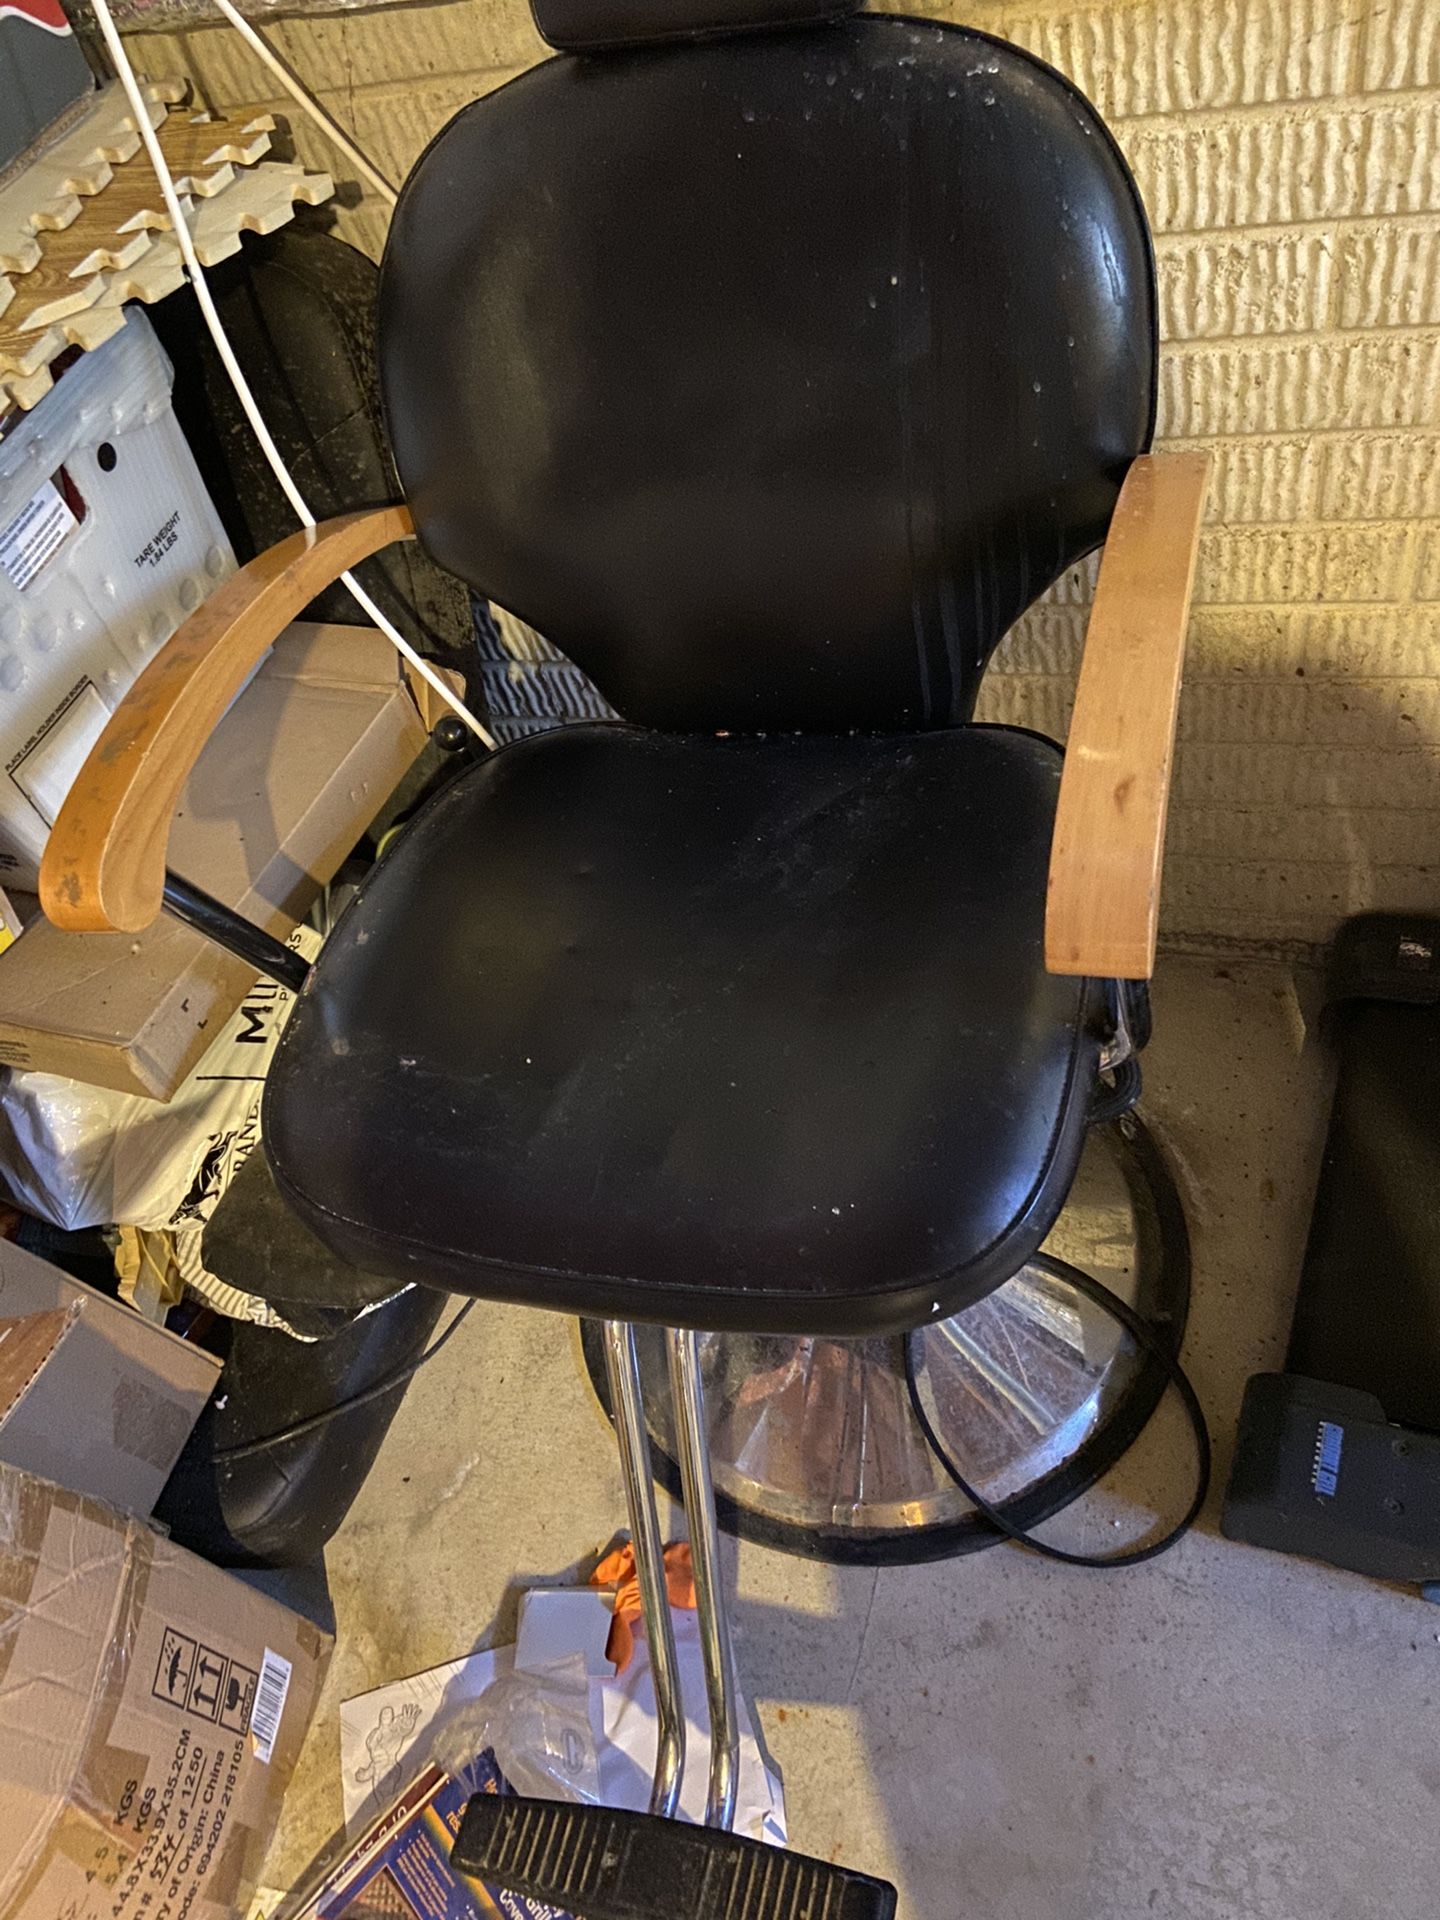 Waxing or facial chairs with recliner